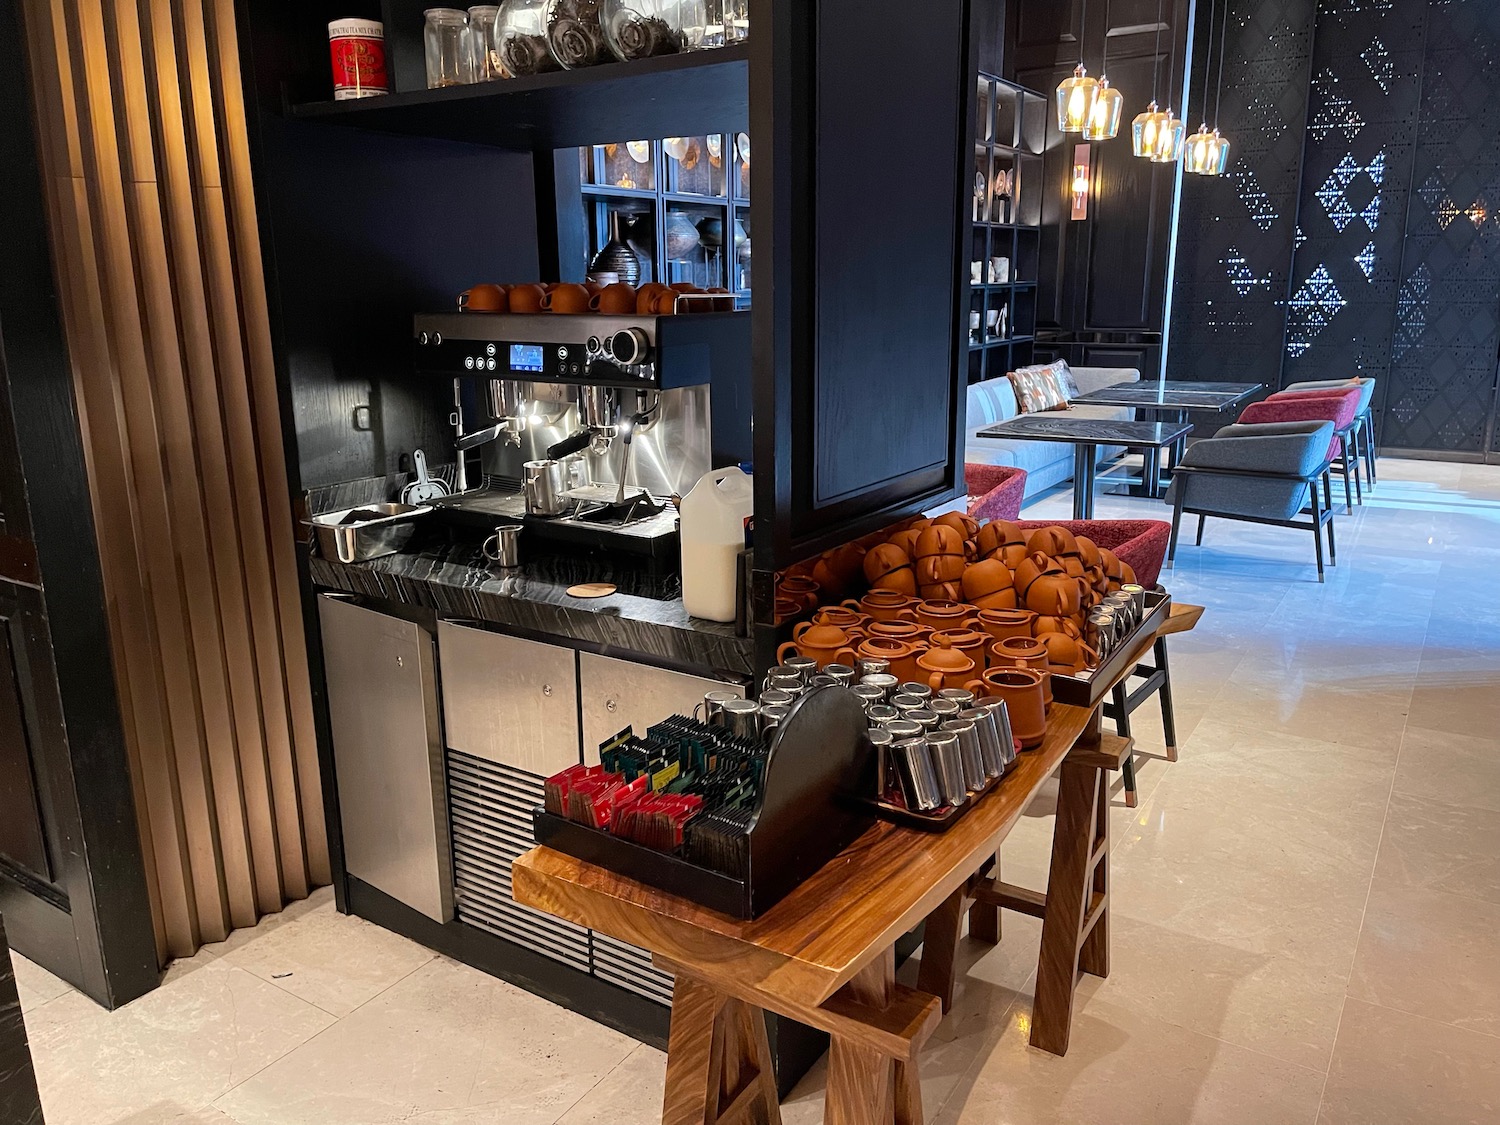 a coffee machine and utensils on a table